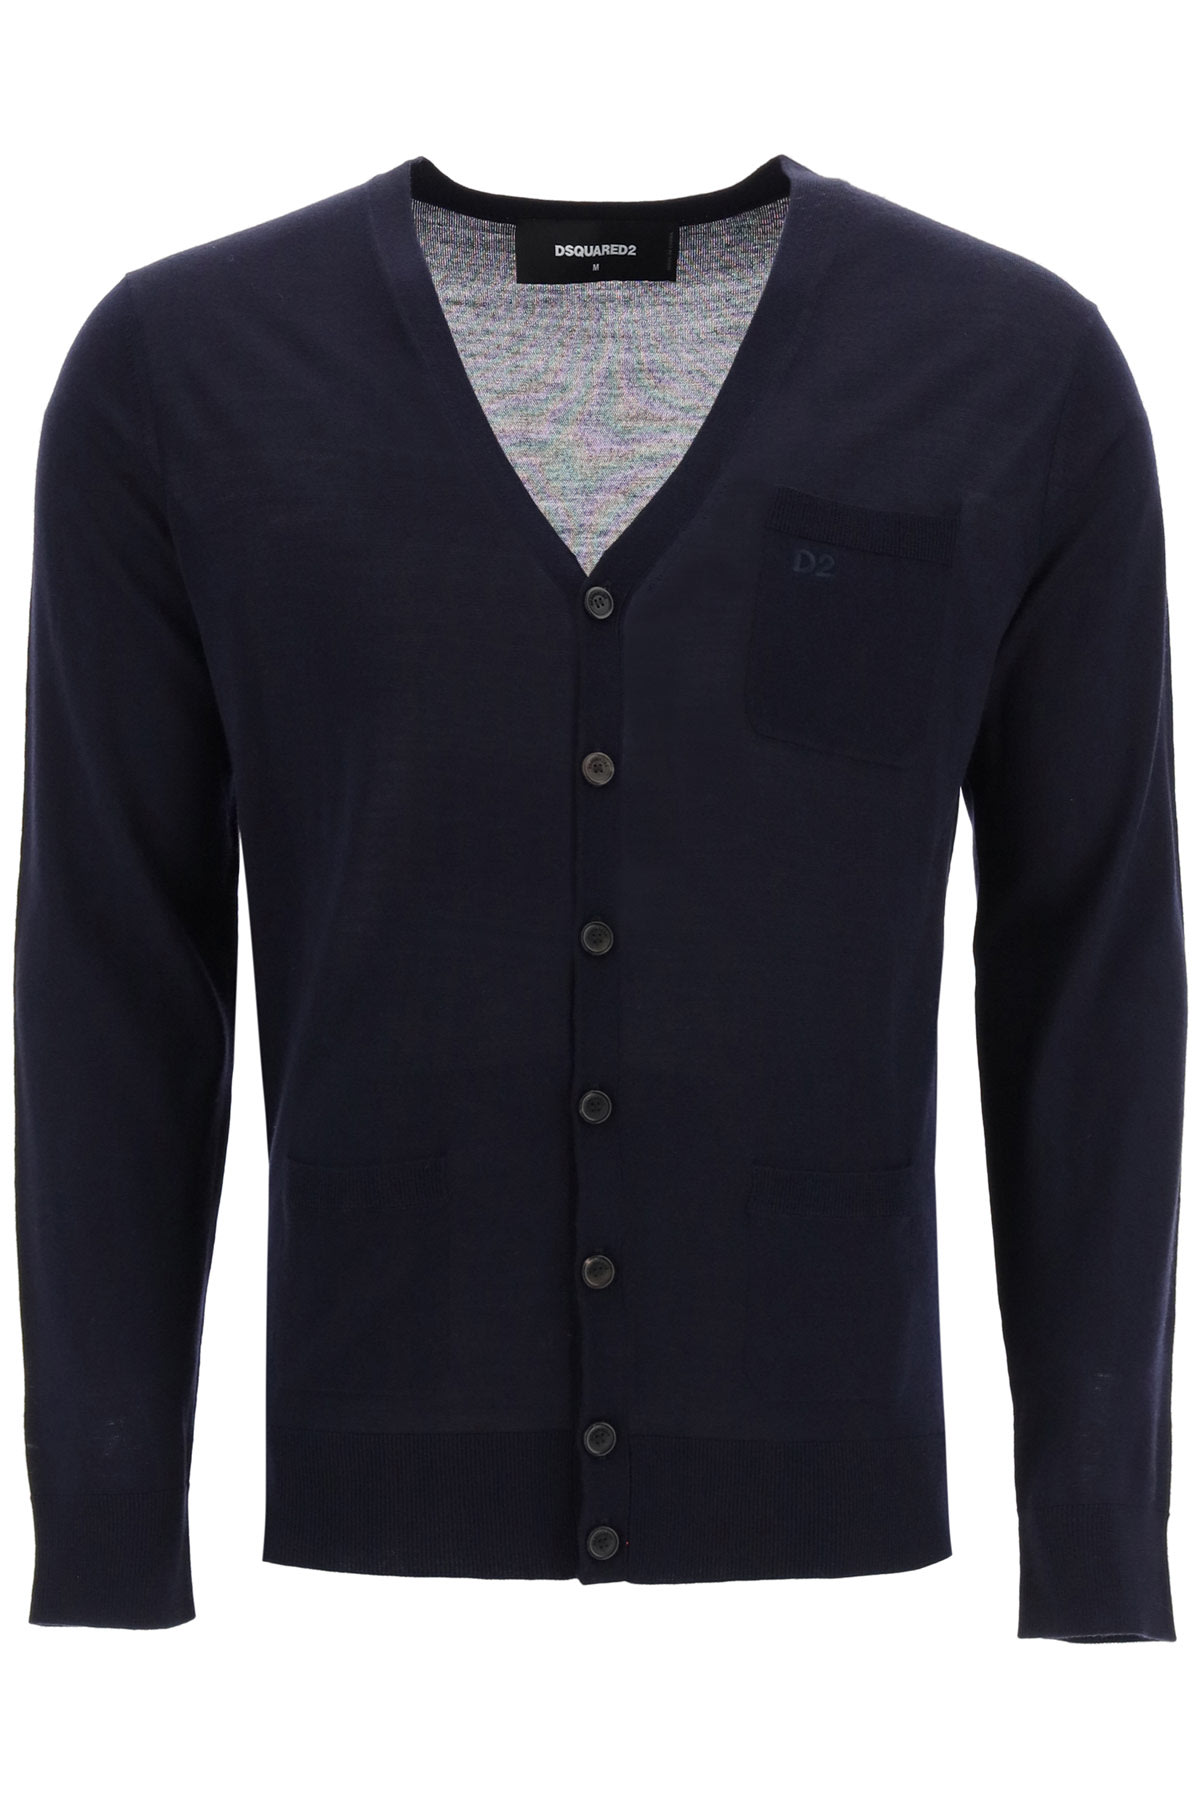 Dsquared2 Cardigan With Embroidered Logo